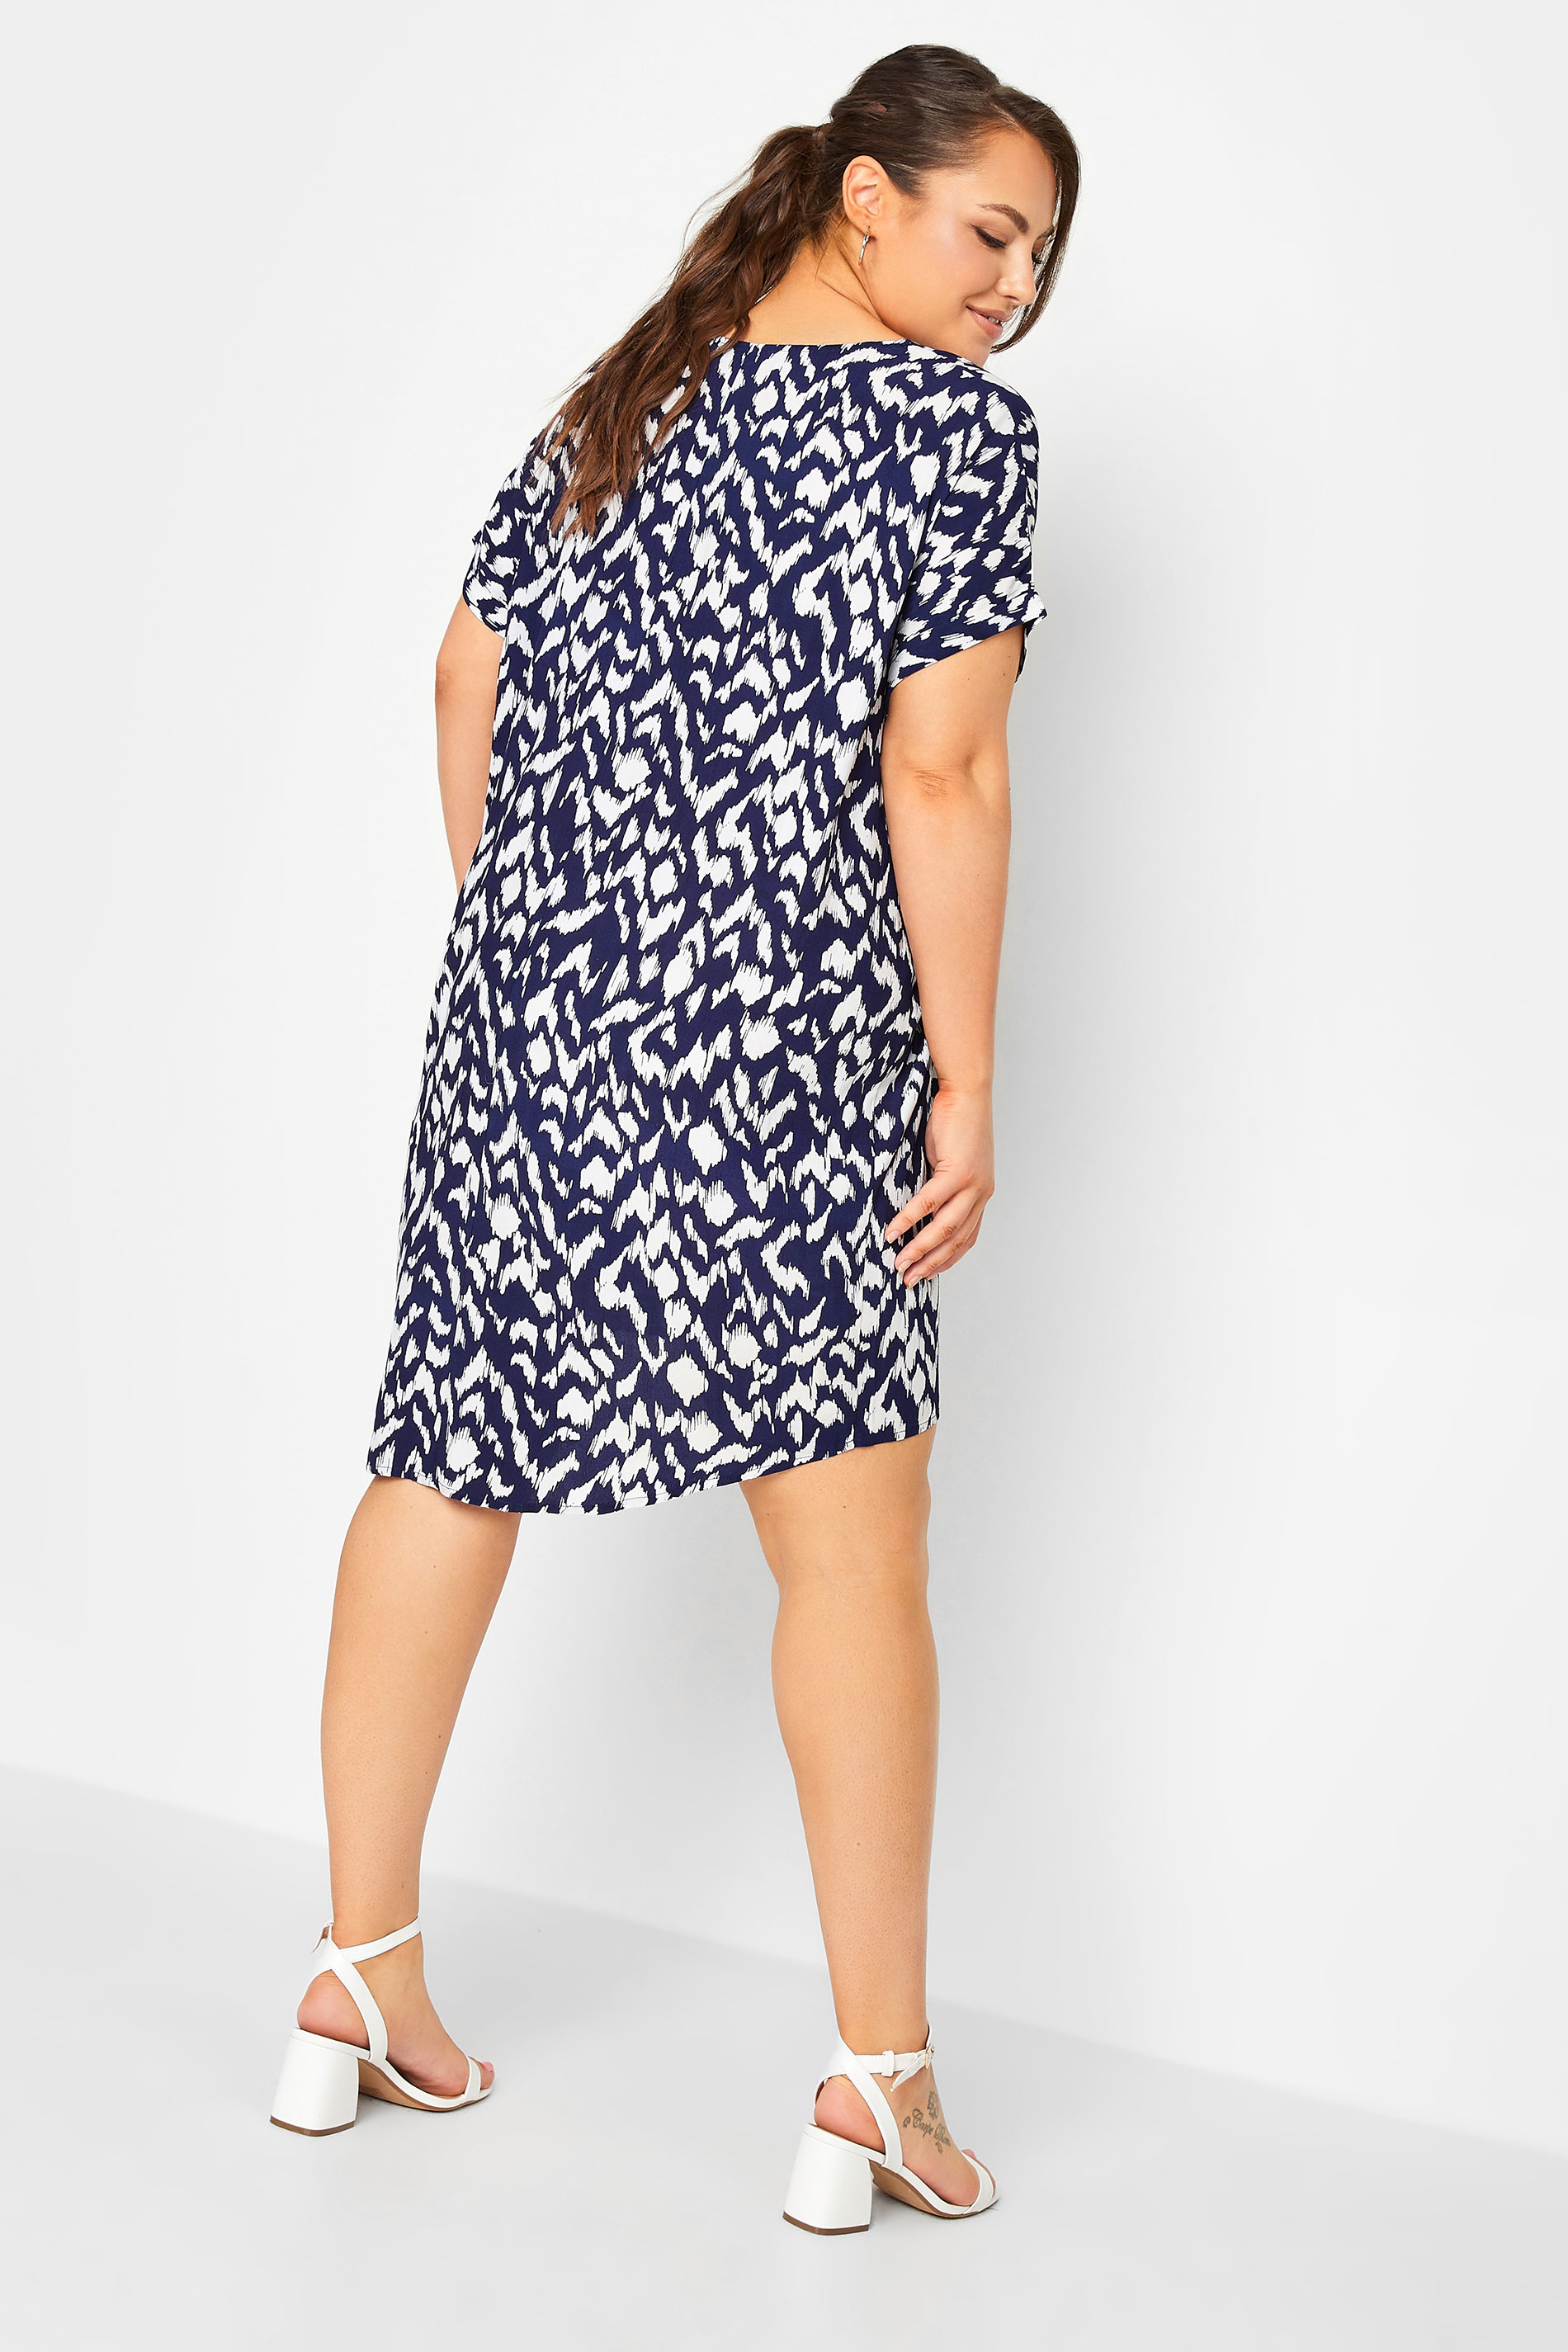 YOURS Plus Size Navy Blue Aztec Print Shift Dress | Yours Clothing 3